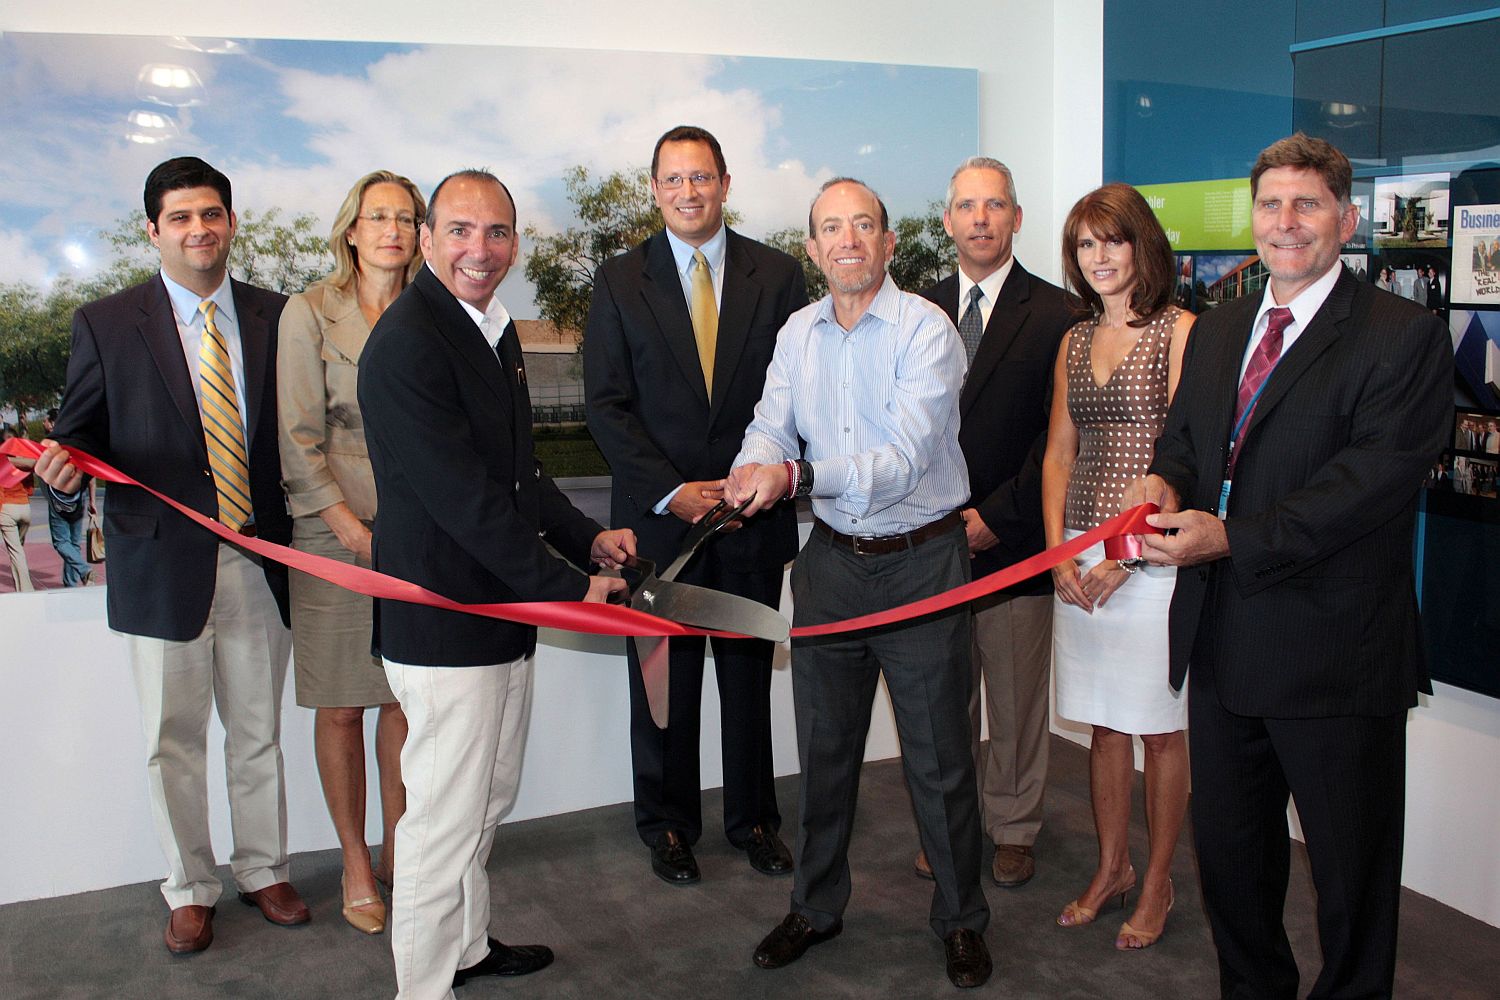 Cutting the ceremonial ribbon are Rechler Equity Managing Partners Gregg Rechler (left) and Mitchell Rechler, with (from l to r) Suffolk County IDA CEO & Executive Director Anthony Manetta, Southampton Councilwoman Bridget Fleming, Southampton Councilman Christopher Nuzzi, Southampton Councilman James Malone, Southampton Supervisor Anna Throne-Holst, and Suffolk County Airport Manager Anthony Ceglio.